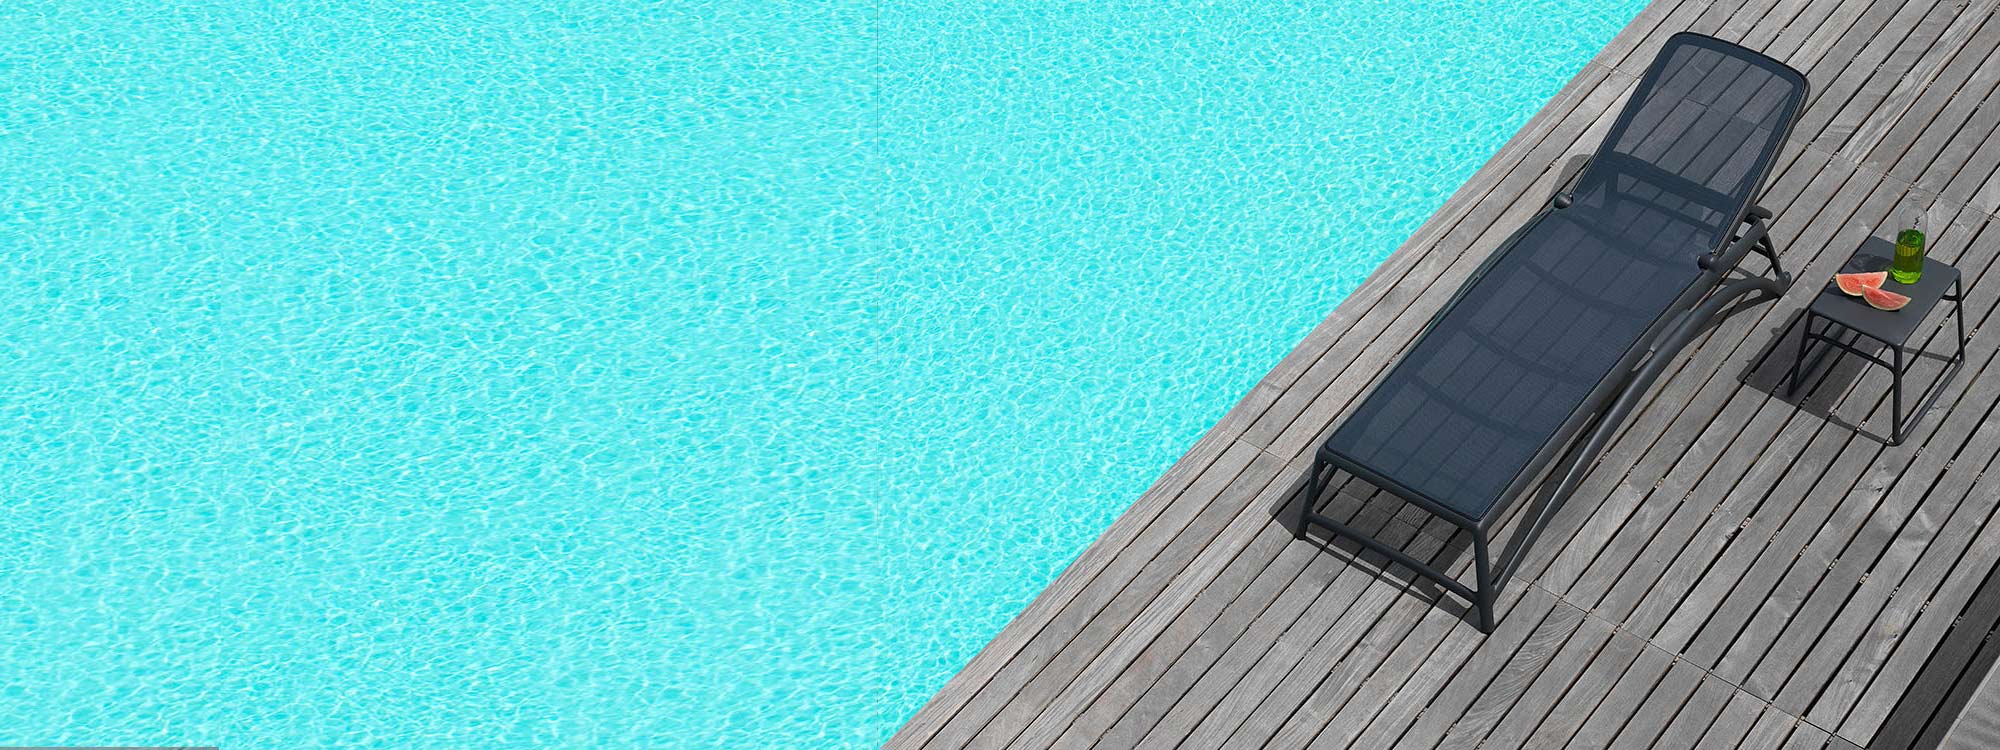 Image of aerial view of Atlantico anthracite contract sun lounger and Pop side table by Nardi, shown on wooden-decked poolside